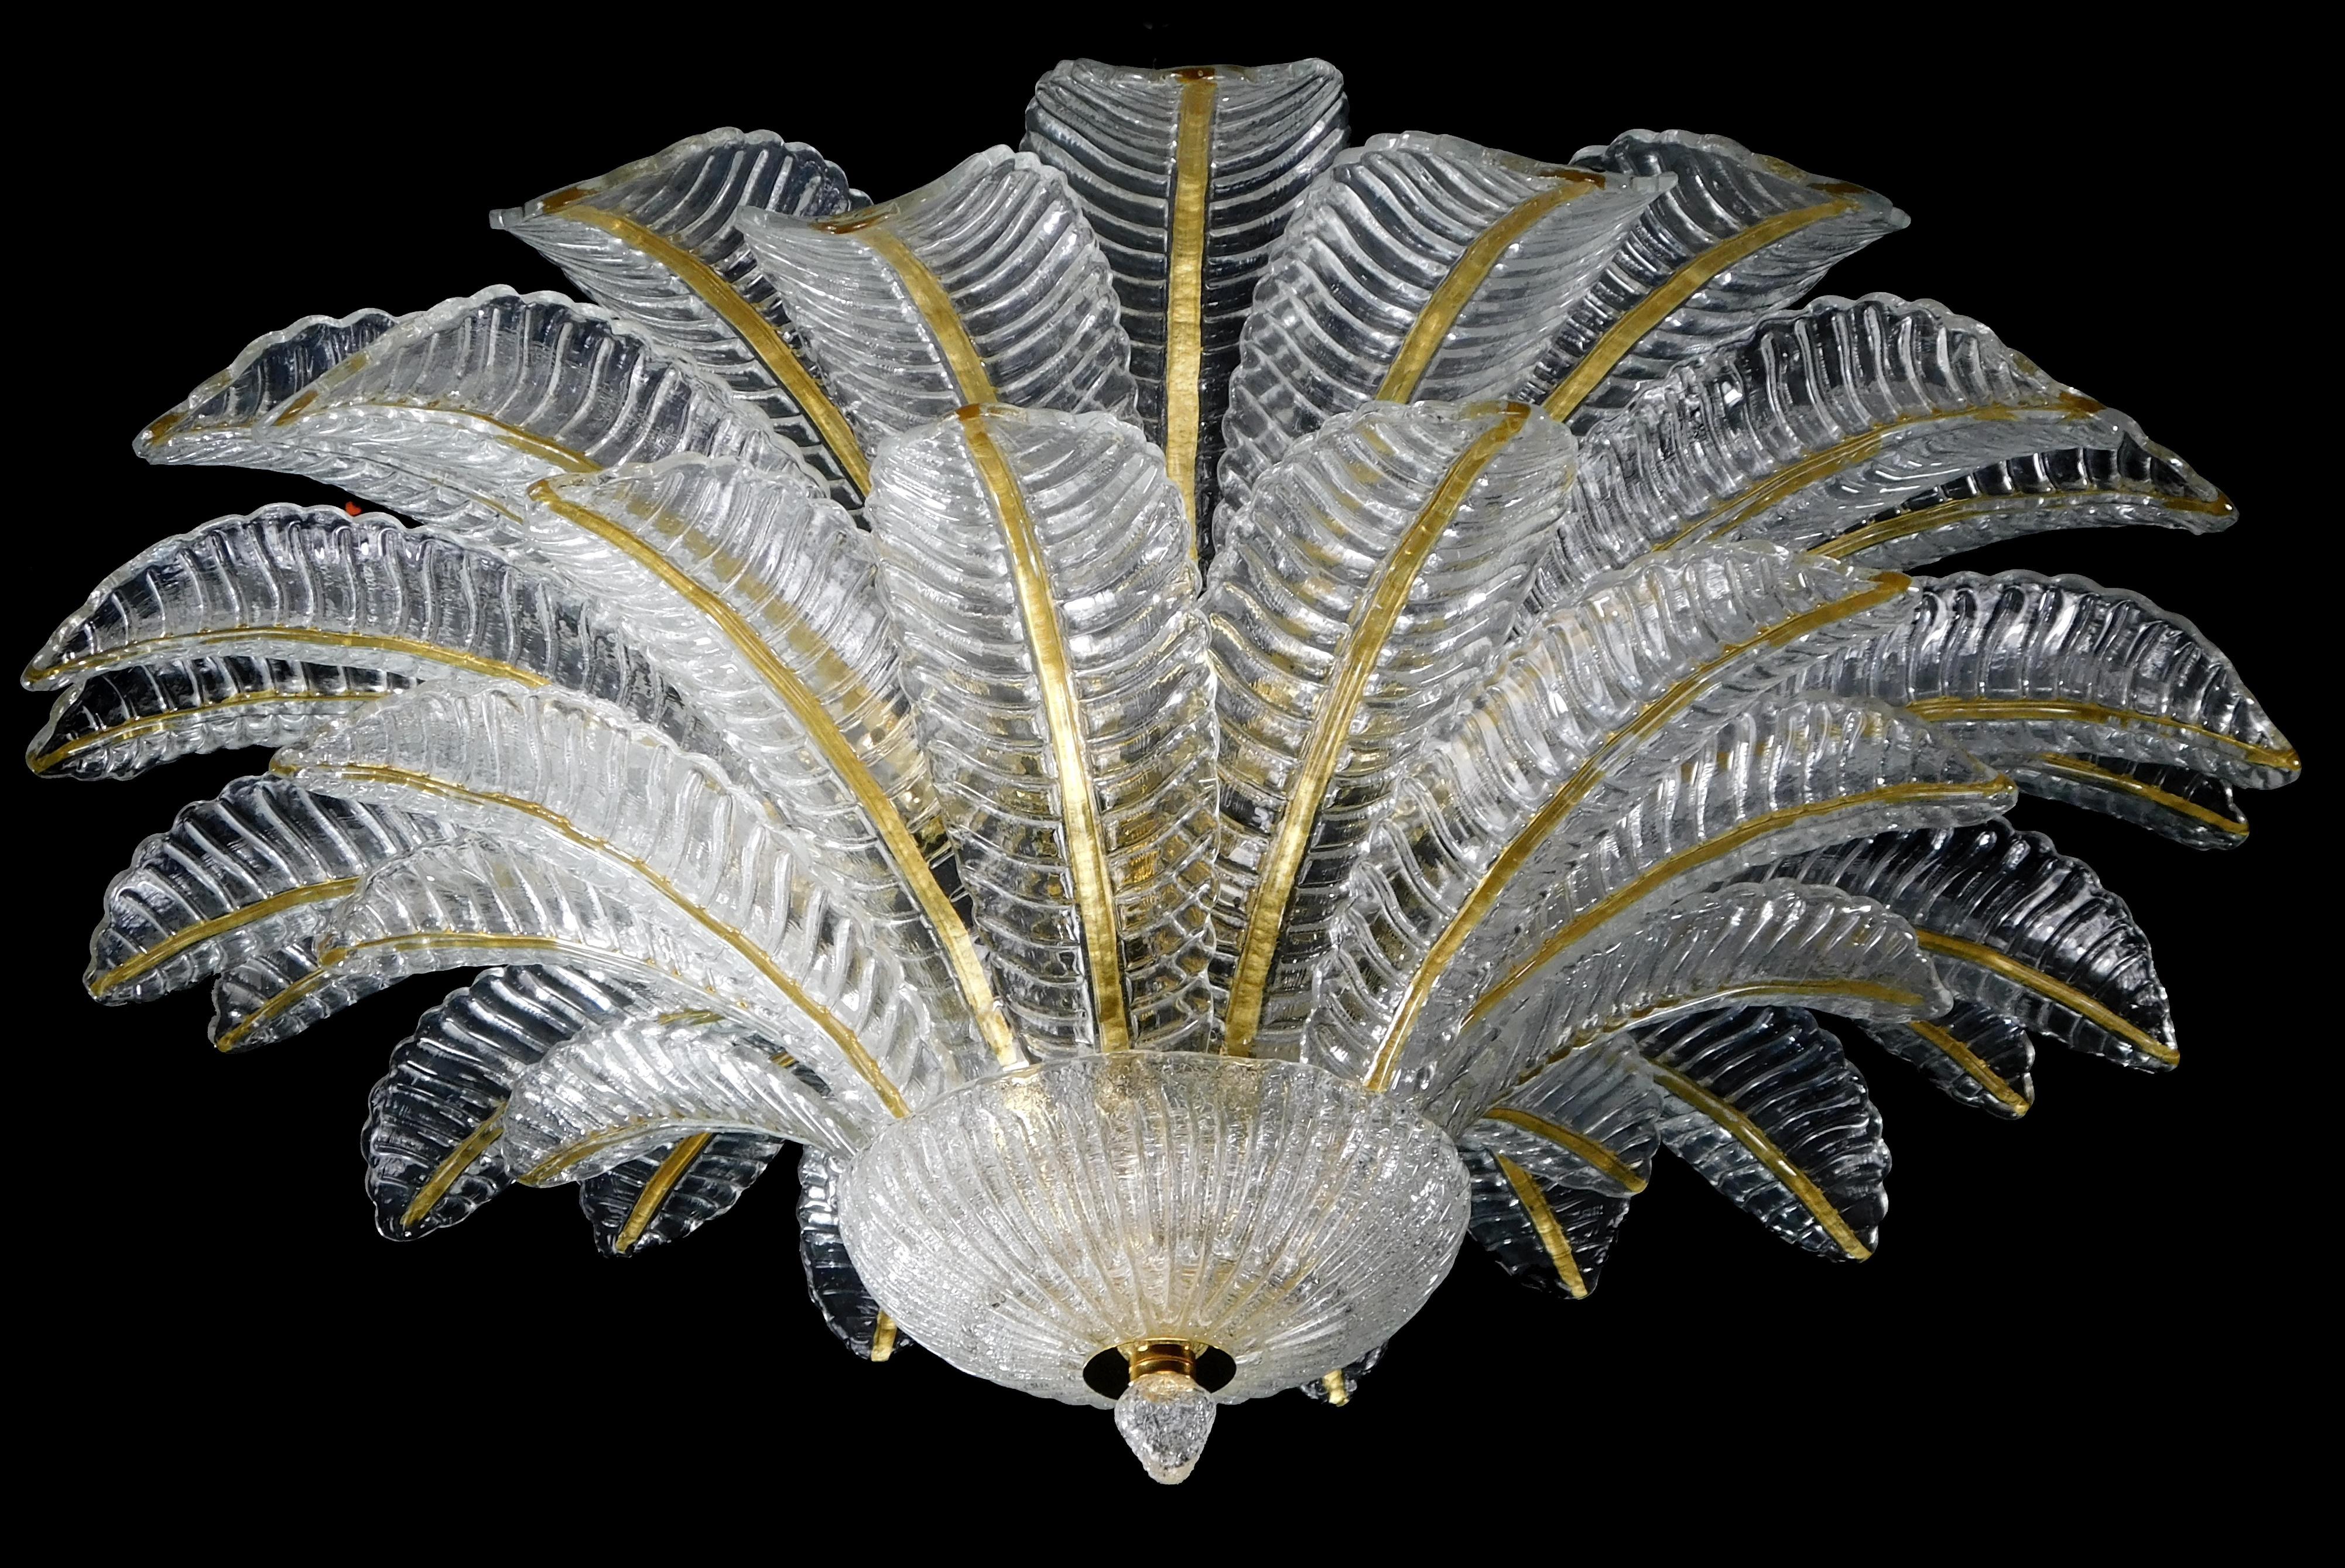 Italian flush mount with clear hand blown Murano Felci fern glass leaves infused with gold, mounted on 24 k gold finish metal frame by Fabio Ltd / Made in Italy
9 lights / E26 or E27 type / max 60W each
Measures: Diameter 39.5 inches, height 18